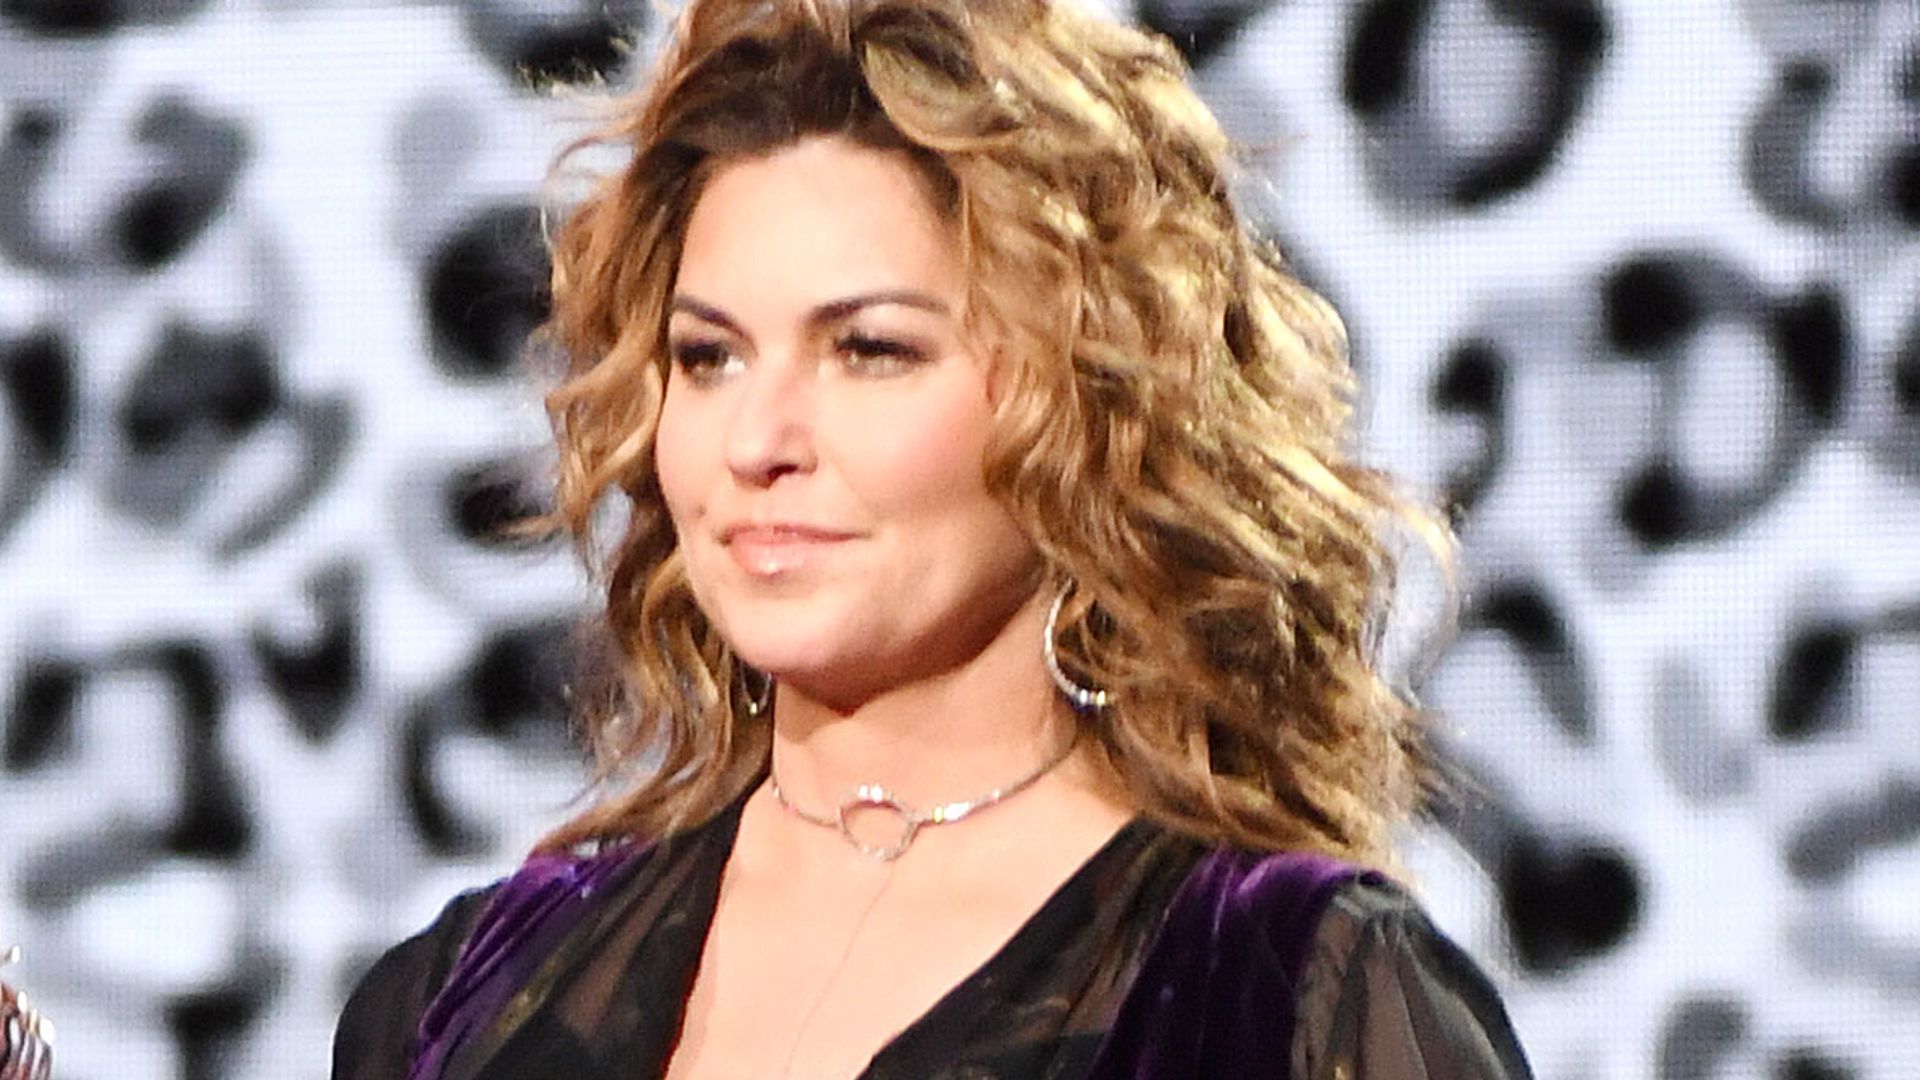 Shania Twain performing on stage in a sheer velvet dress